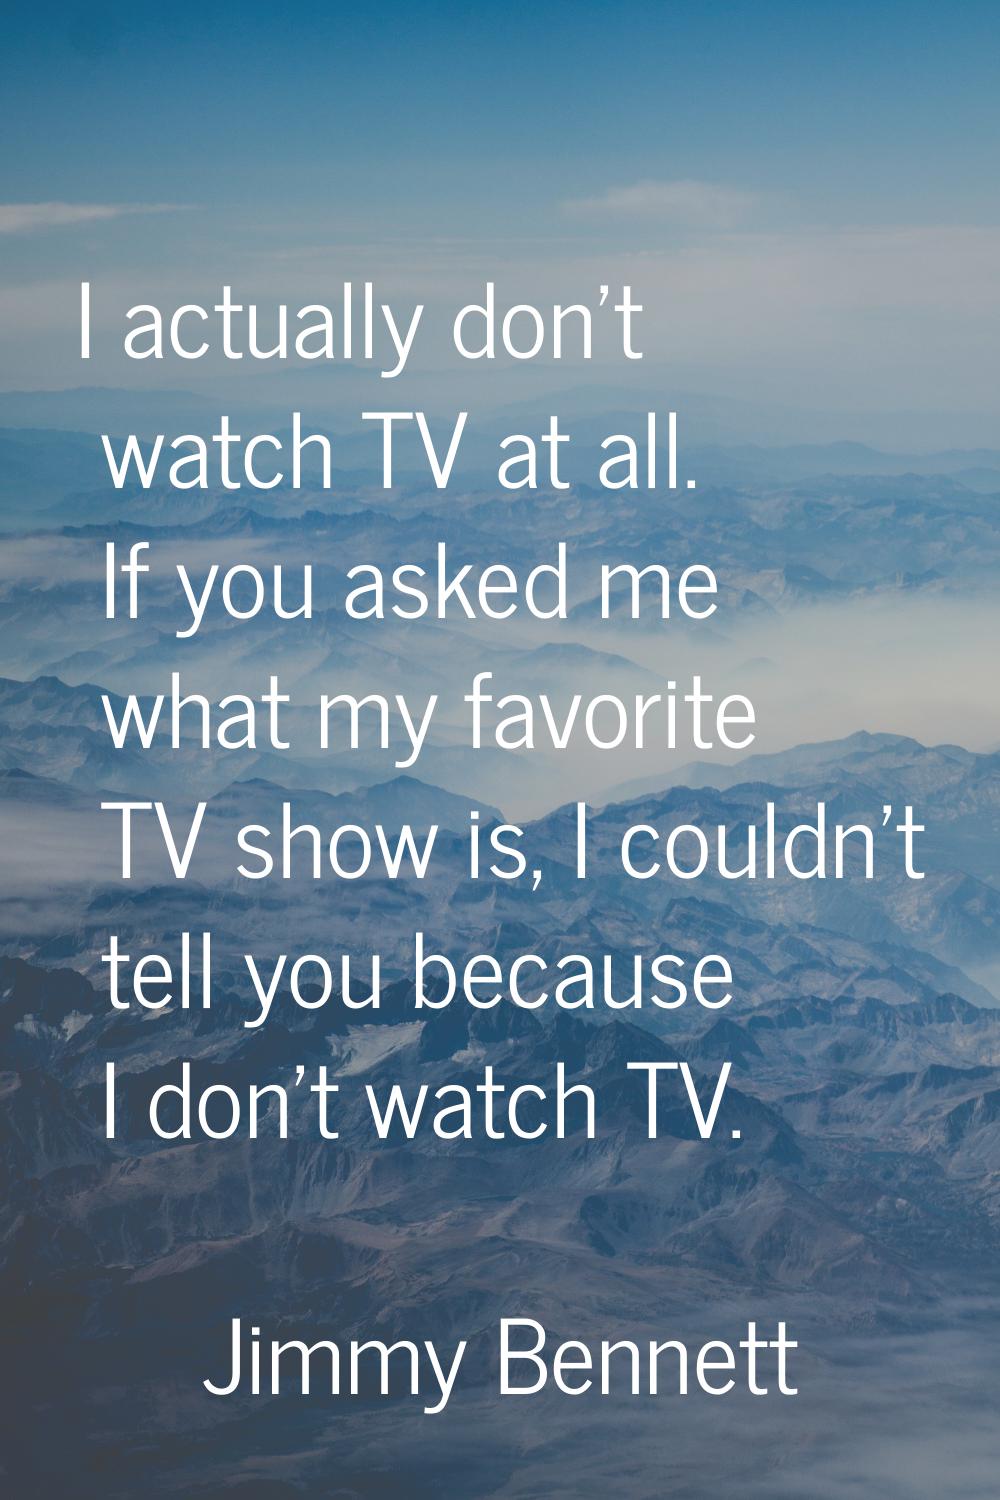 I actually don't watch TV at all. If you asked me what my favorite TV show is, I couldn't tell you 